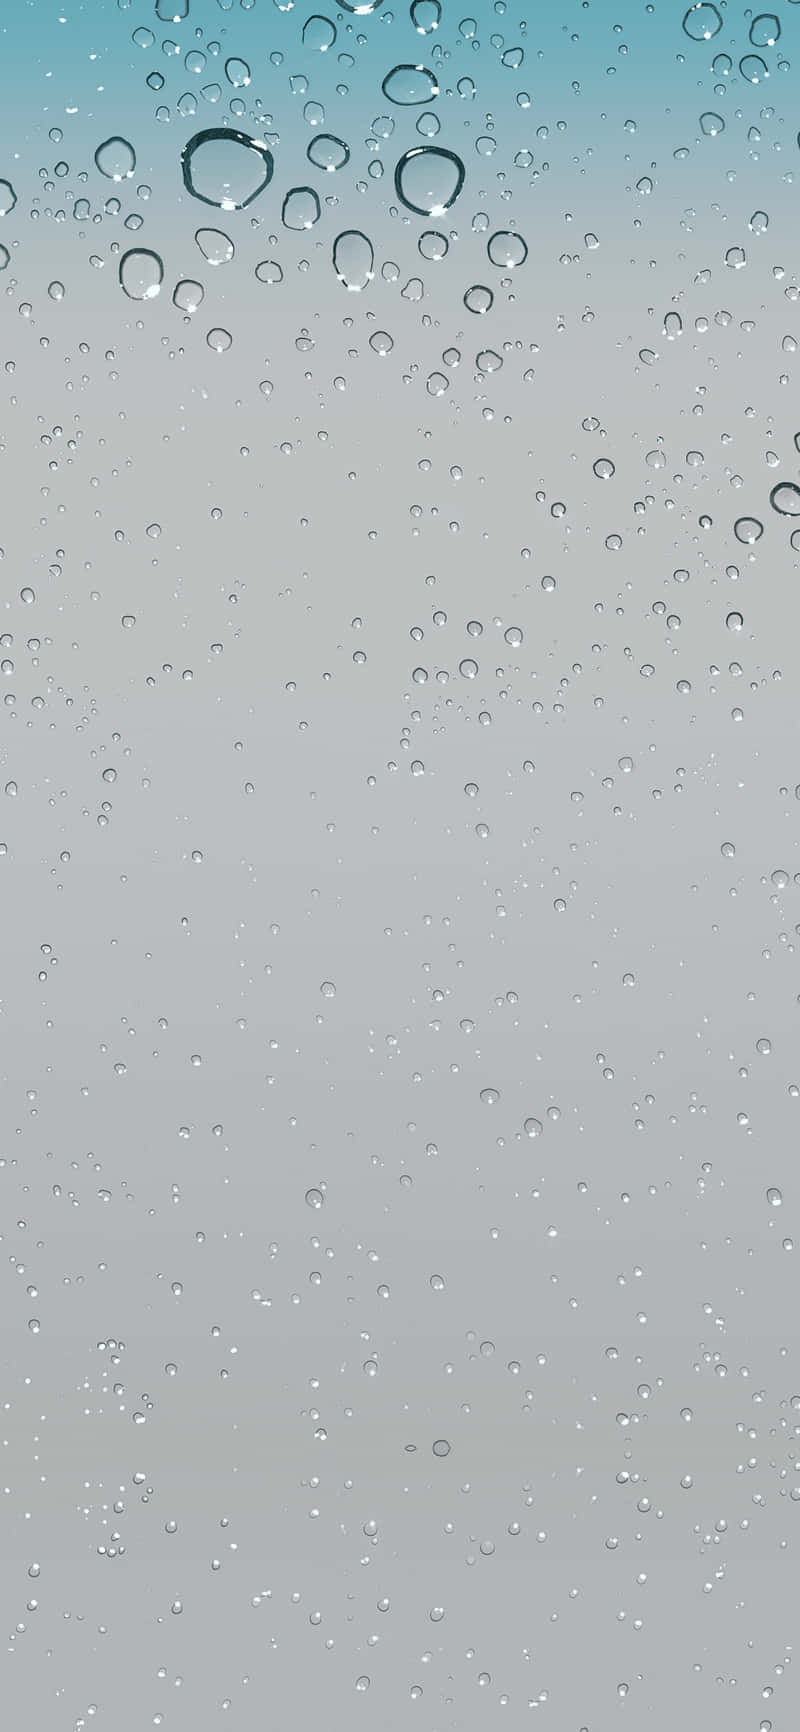 Water Drops On A Glass Wallpaper